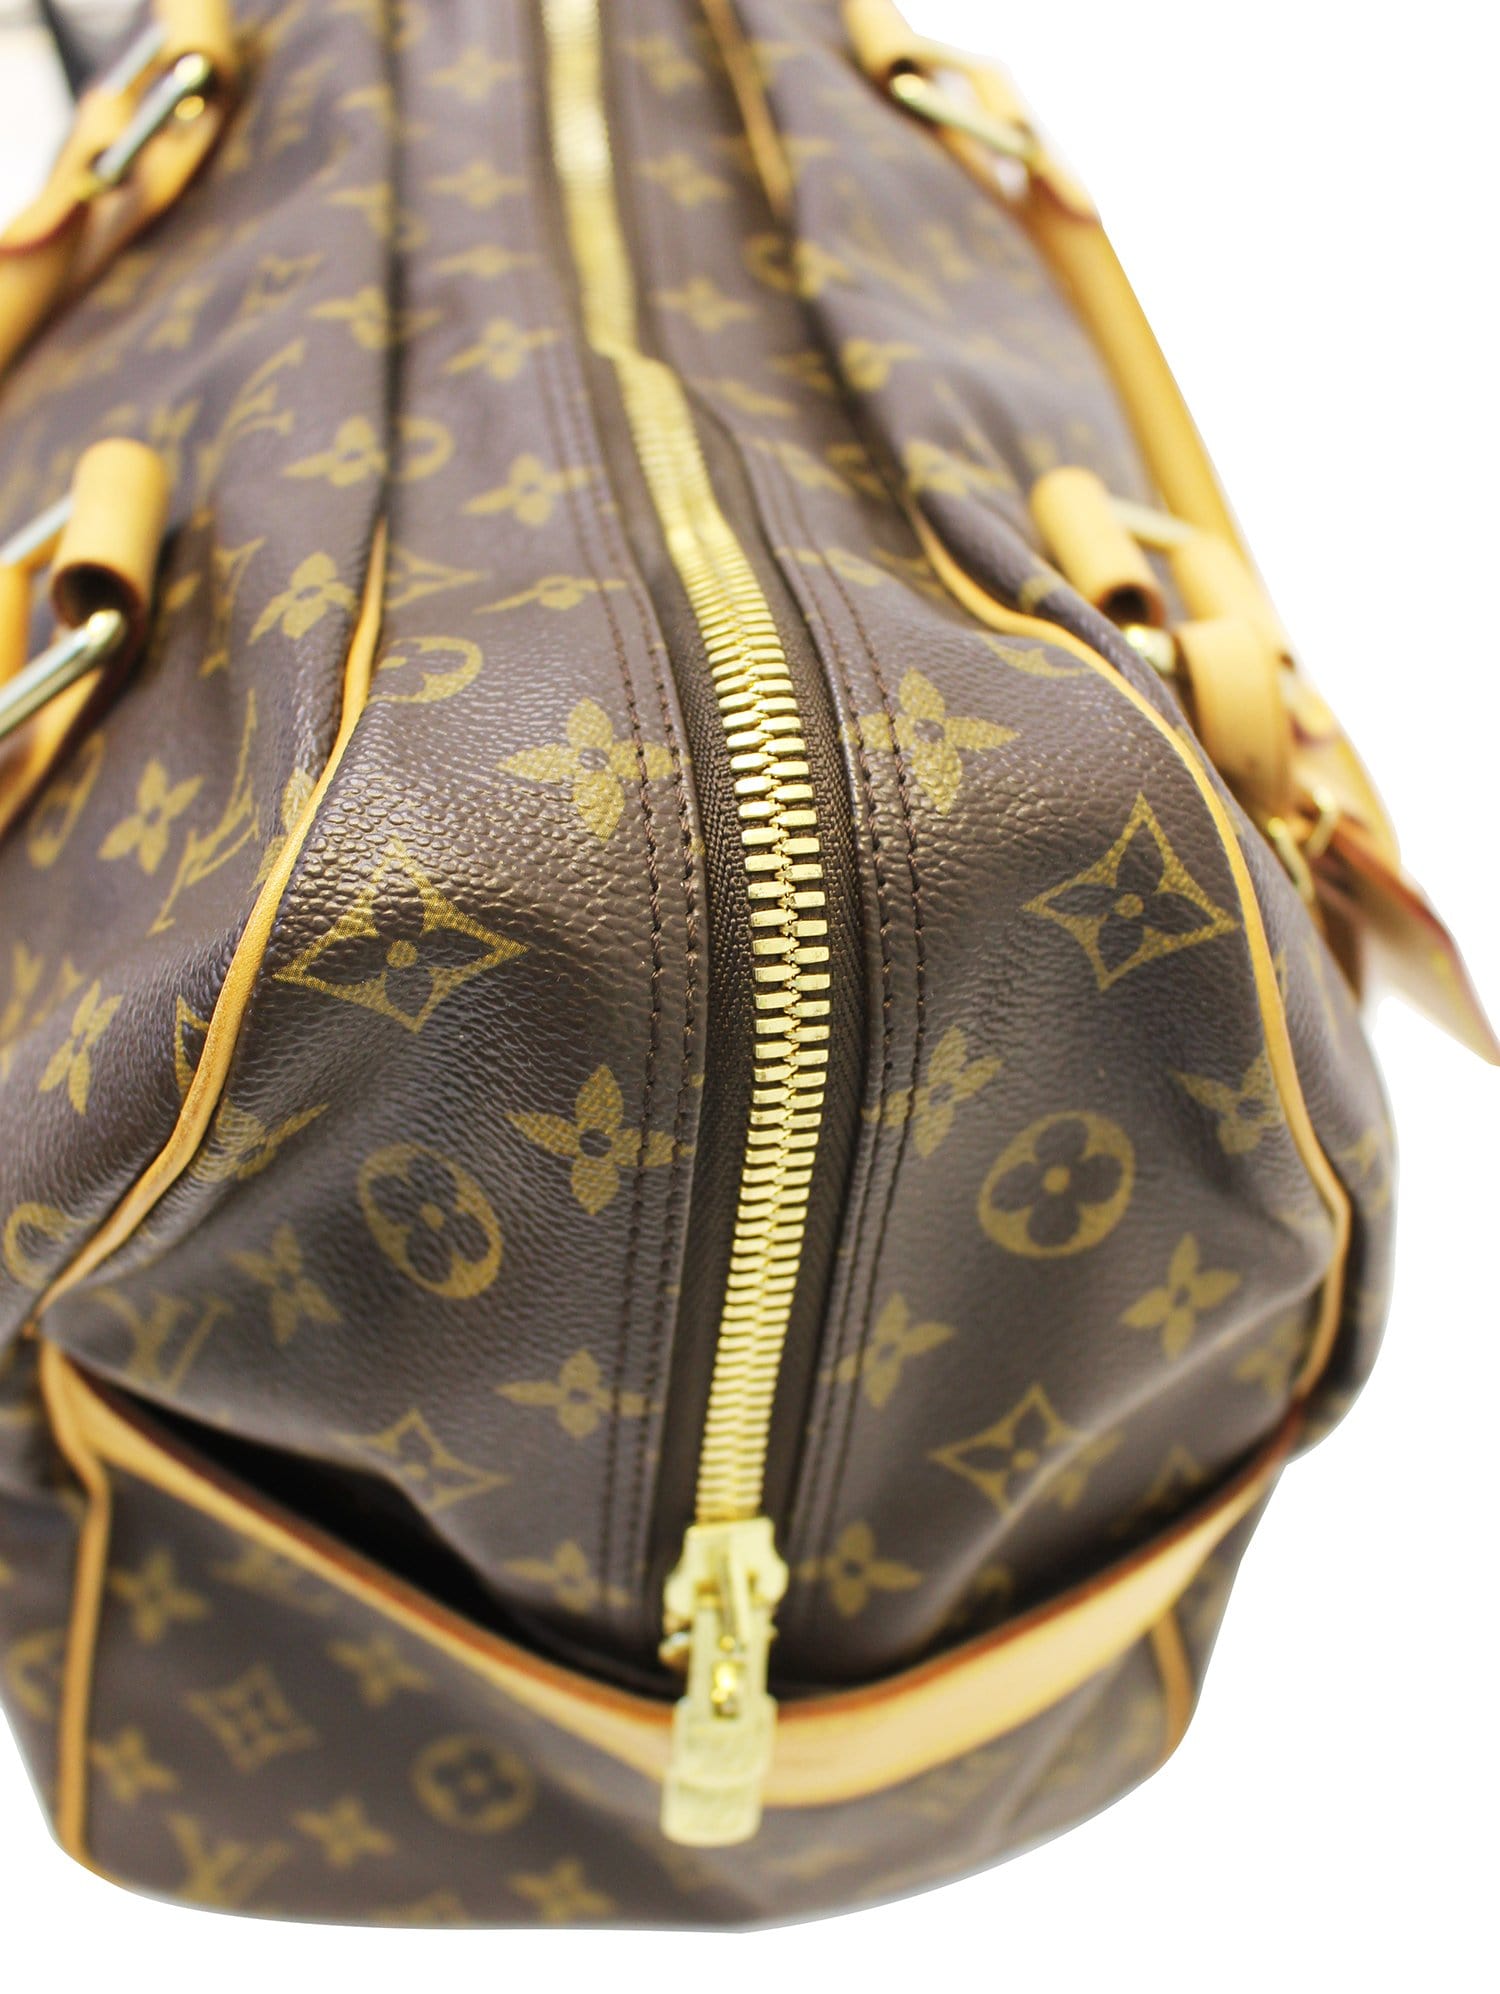 Shop Louis Vuitton MONOGRAM Carry-on Luggage & Travel Bags (M10253